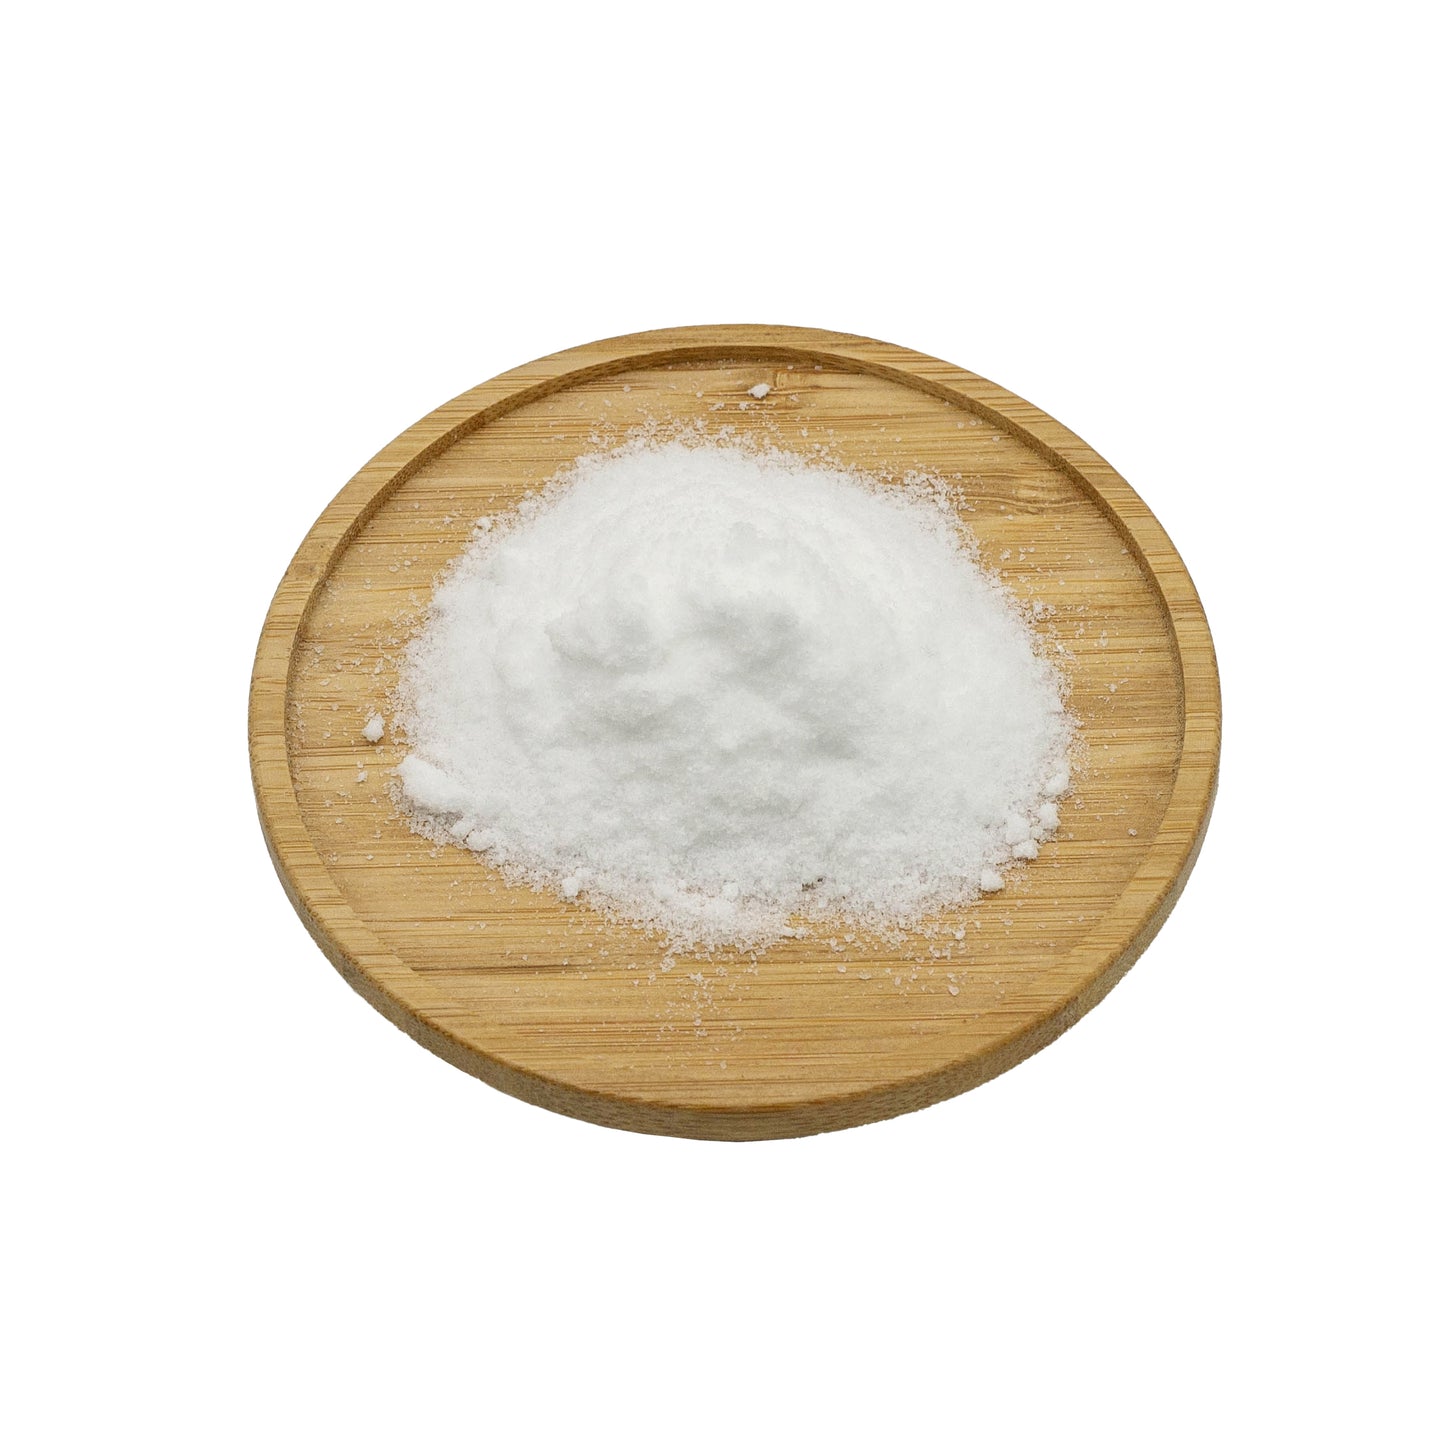 Fermentable dextrose brewing sugar for increasing alcohol without influencing the flavours. 